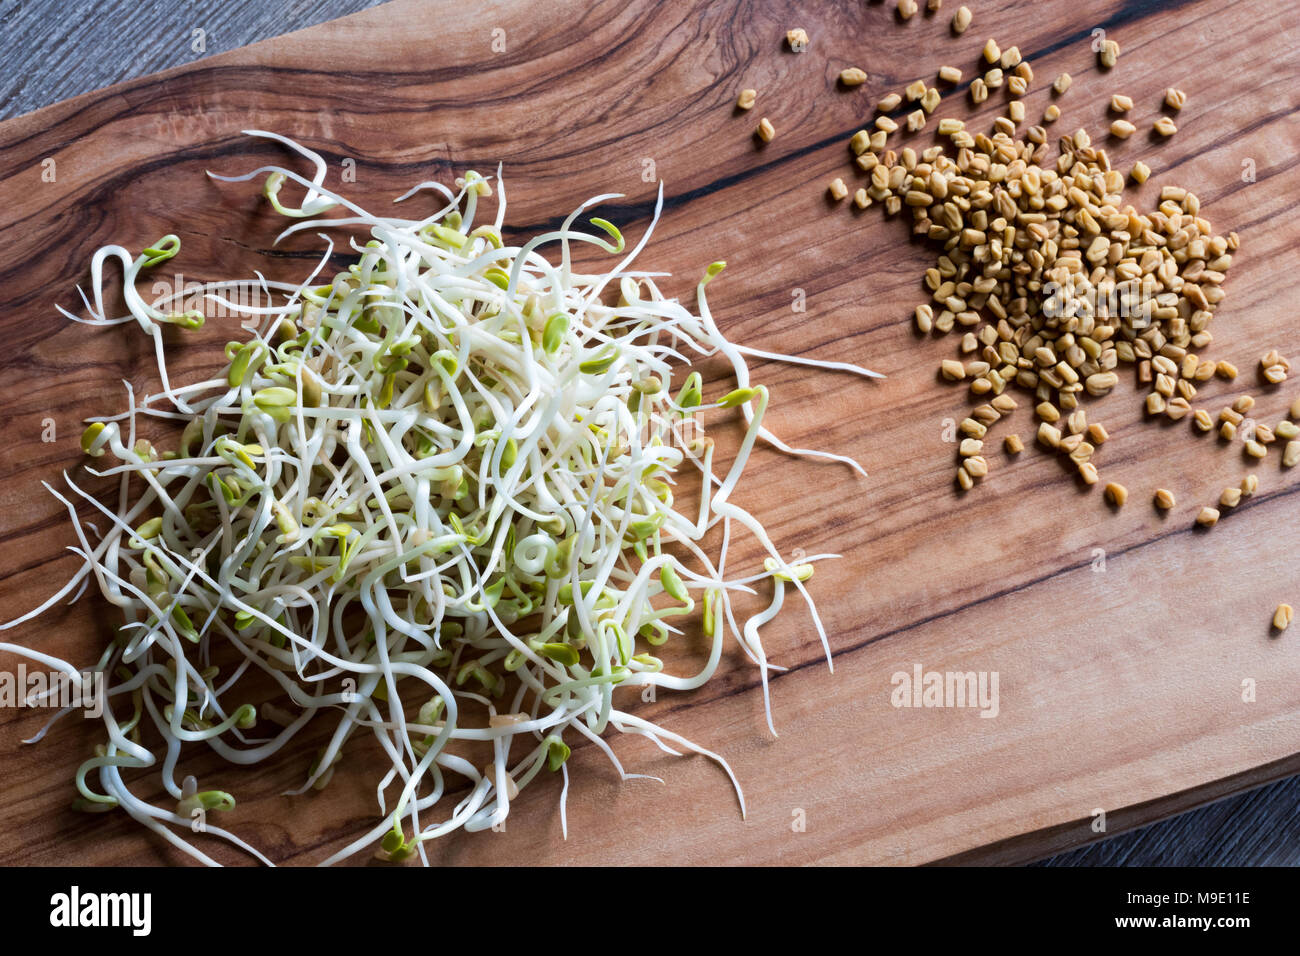 Sprouted and dry fenugreek seeds on a wooden table, top view Stock Photo